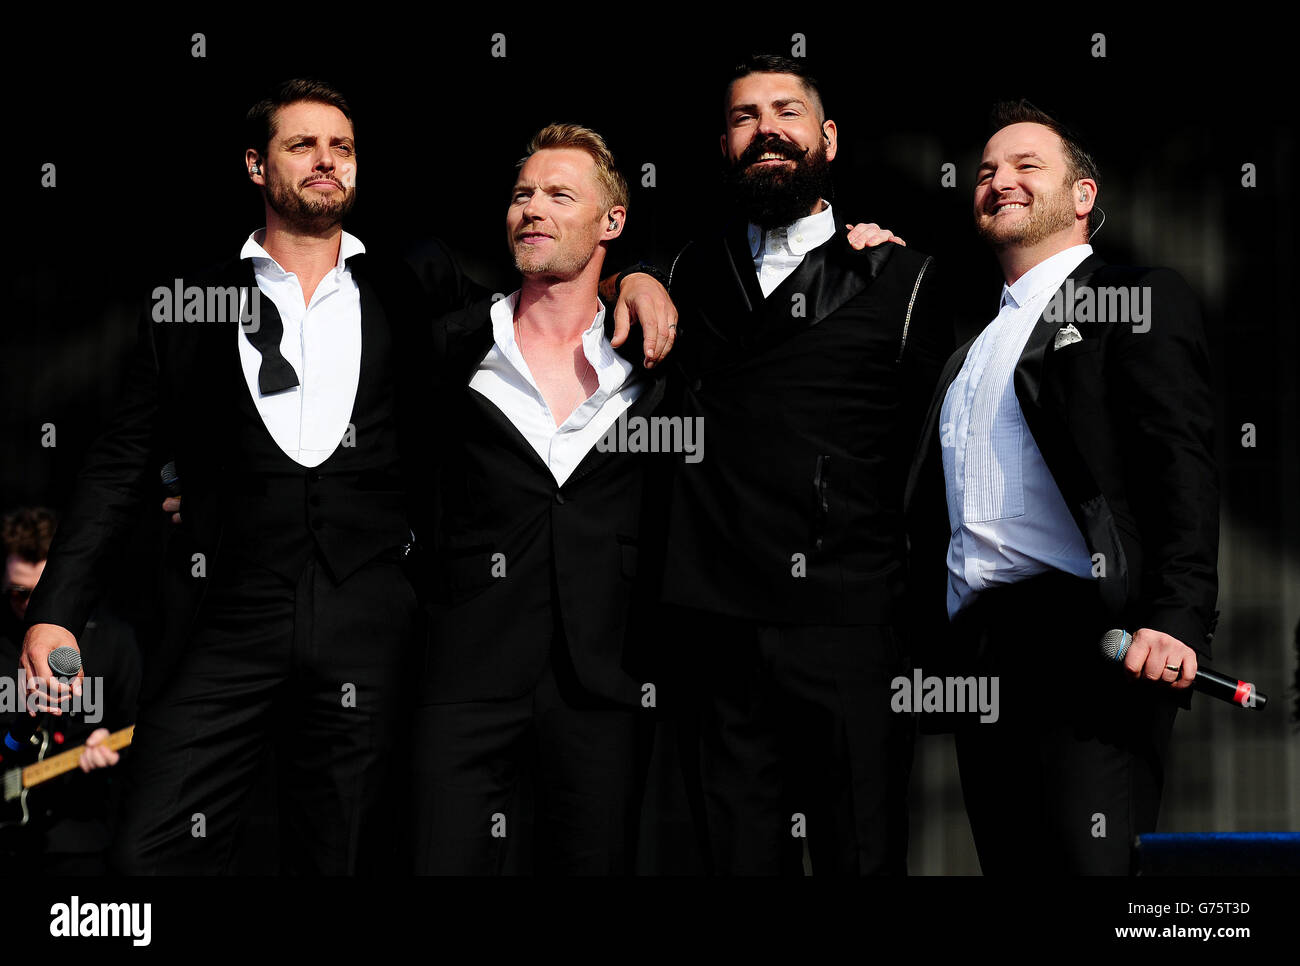 Boyzone (from left to right) Keith Duffy, Ronan Keating, Shane Lynch and Mikey Graham performing at the Barclaycard British Summer Time Festival in Hyde Park, London. Stock Photo